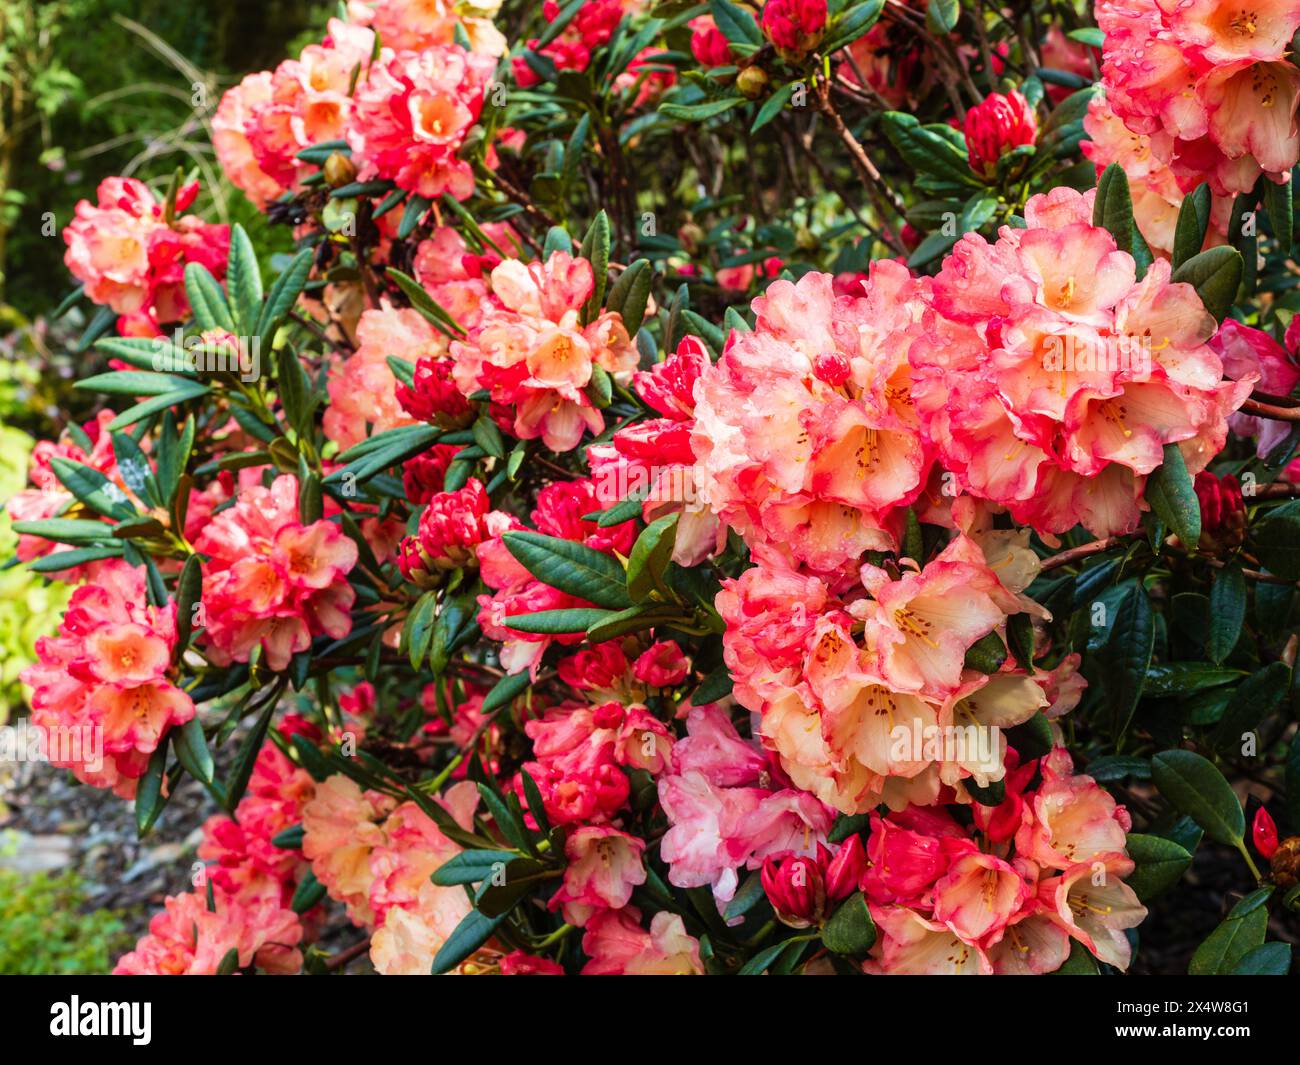 Peach and pink spring flowers of the hardy garden hybrid evergreen shrub, Rhododendron 'Seaview Sunset' Stock Photo